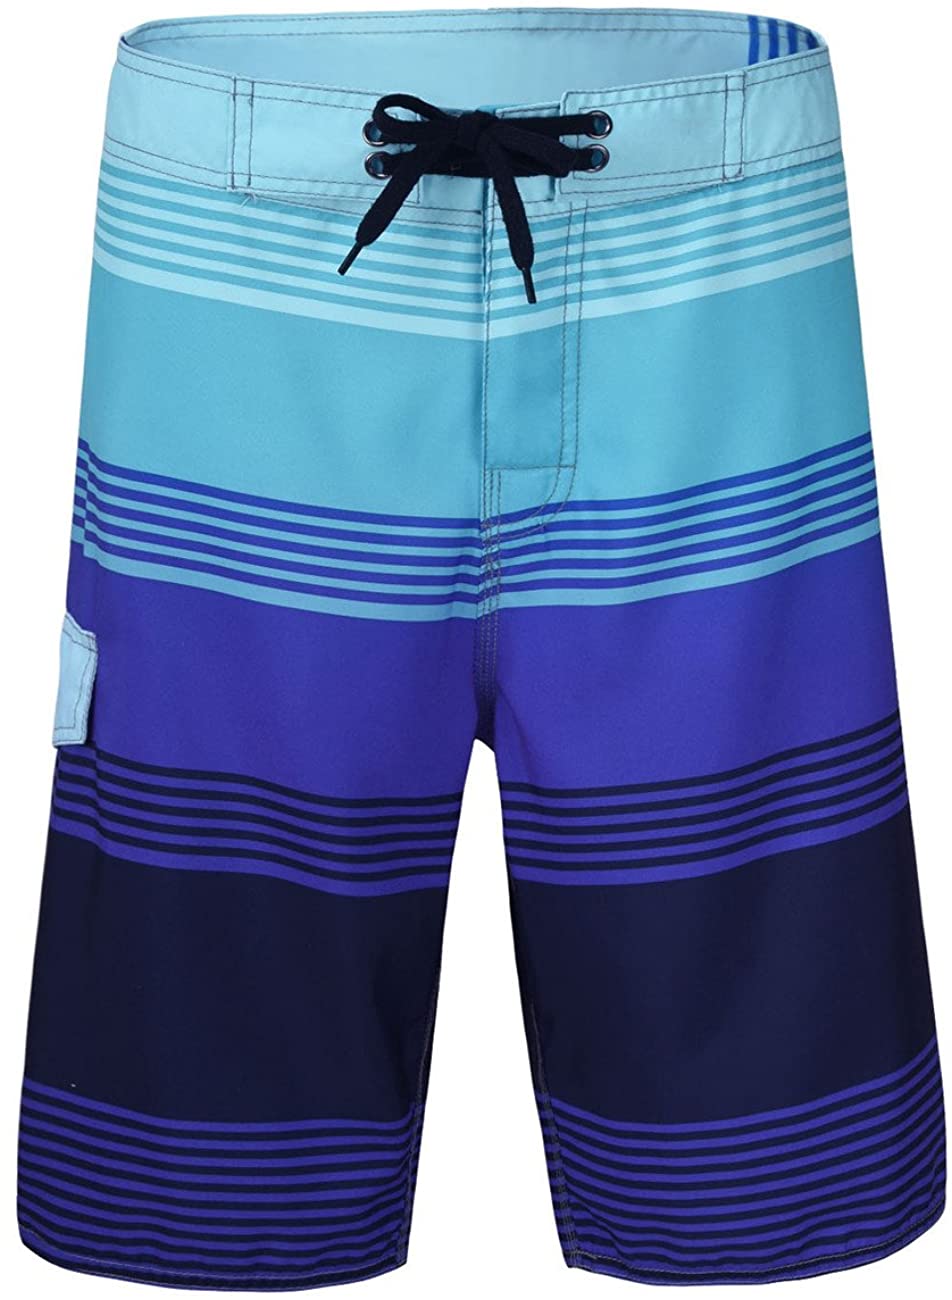 unitop Men's Board Shorts Summer Holiday Surf Trunks Quick Dry 